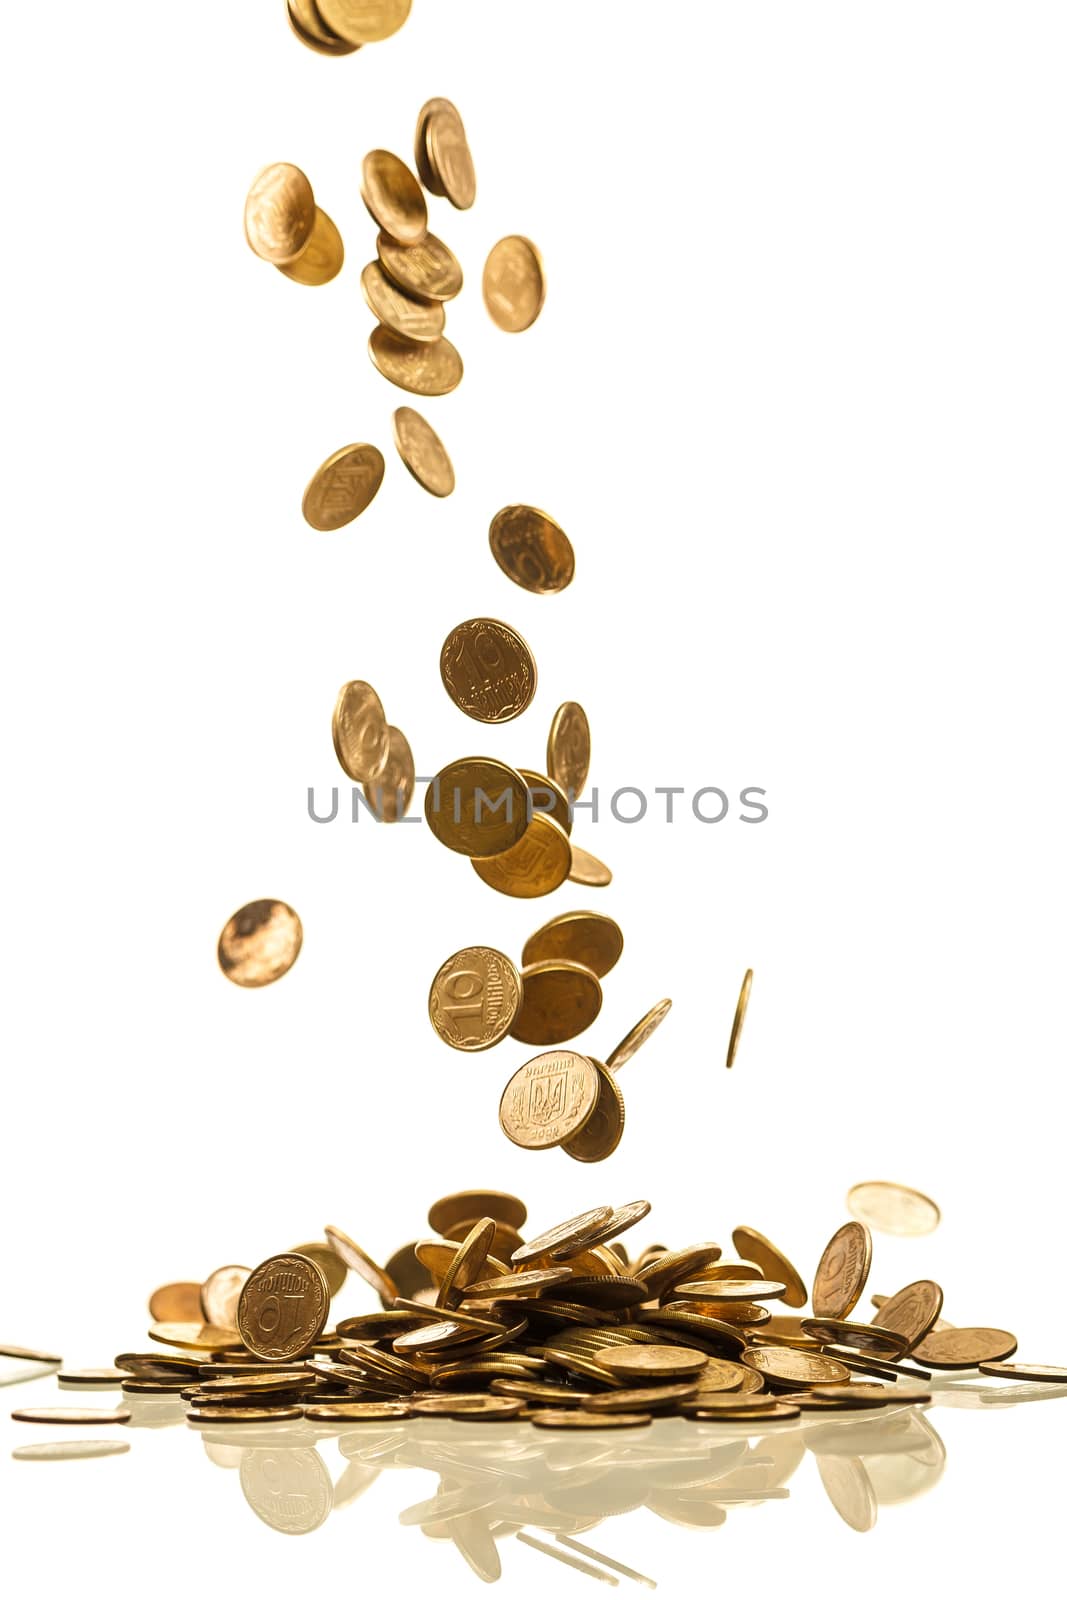 falling gold coins